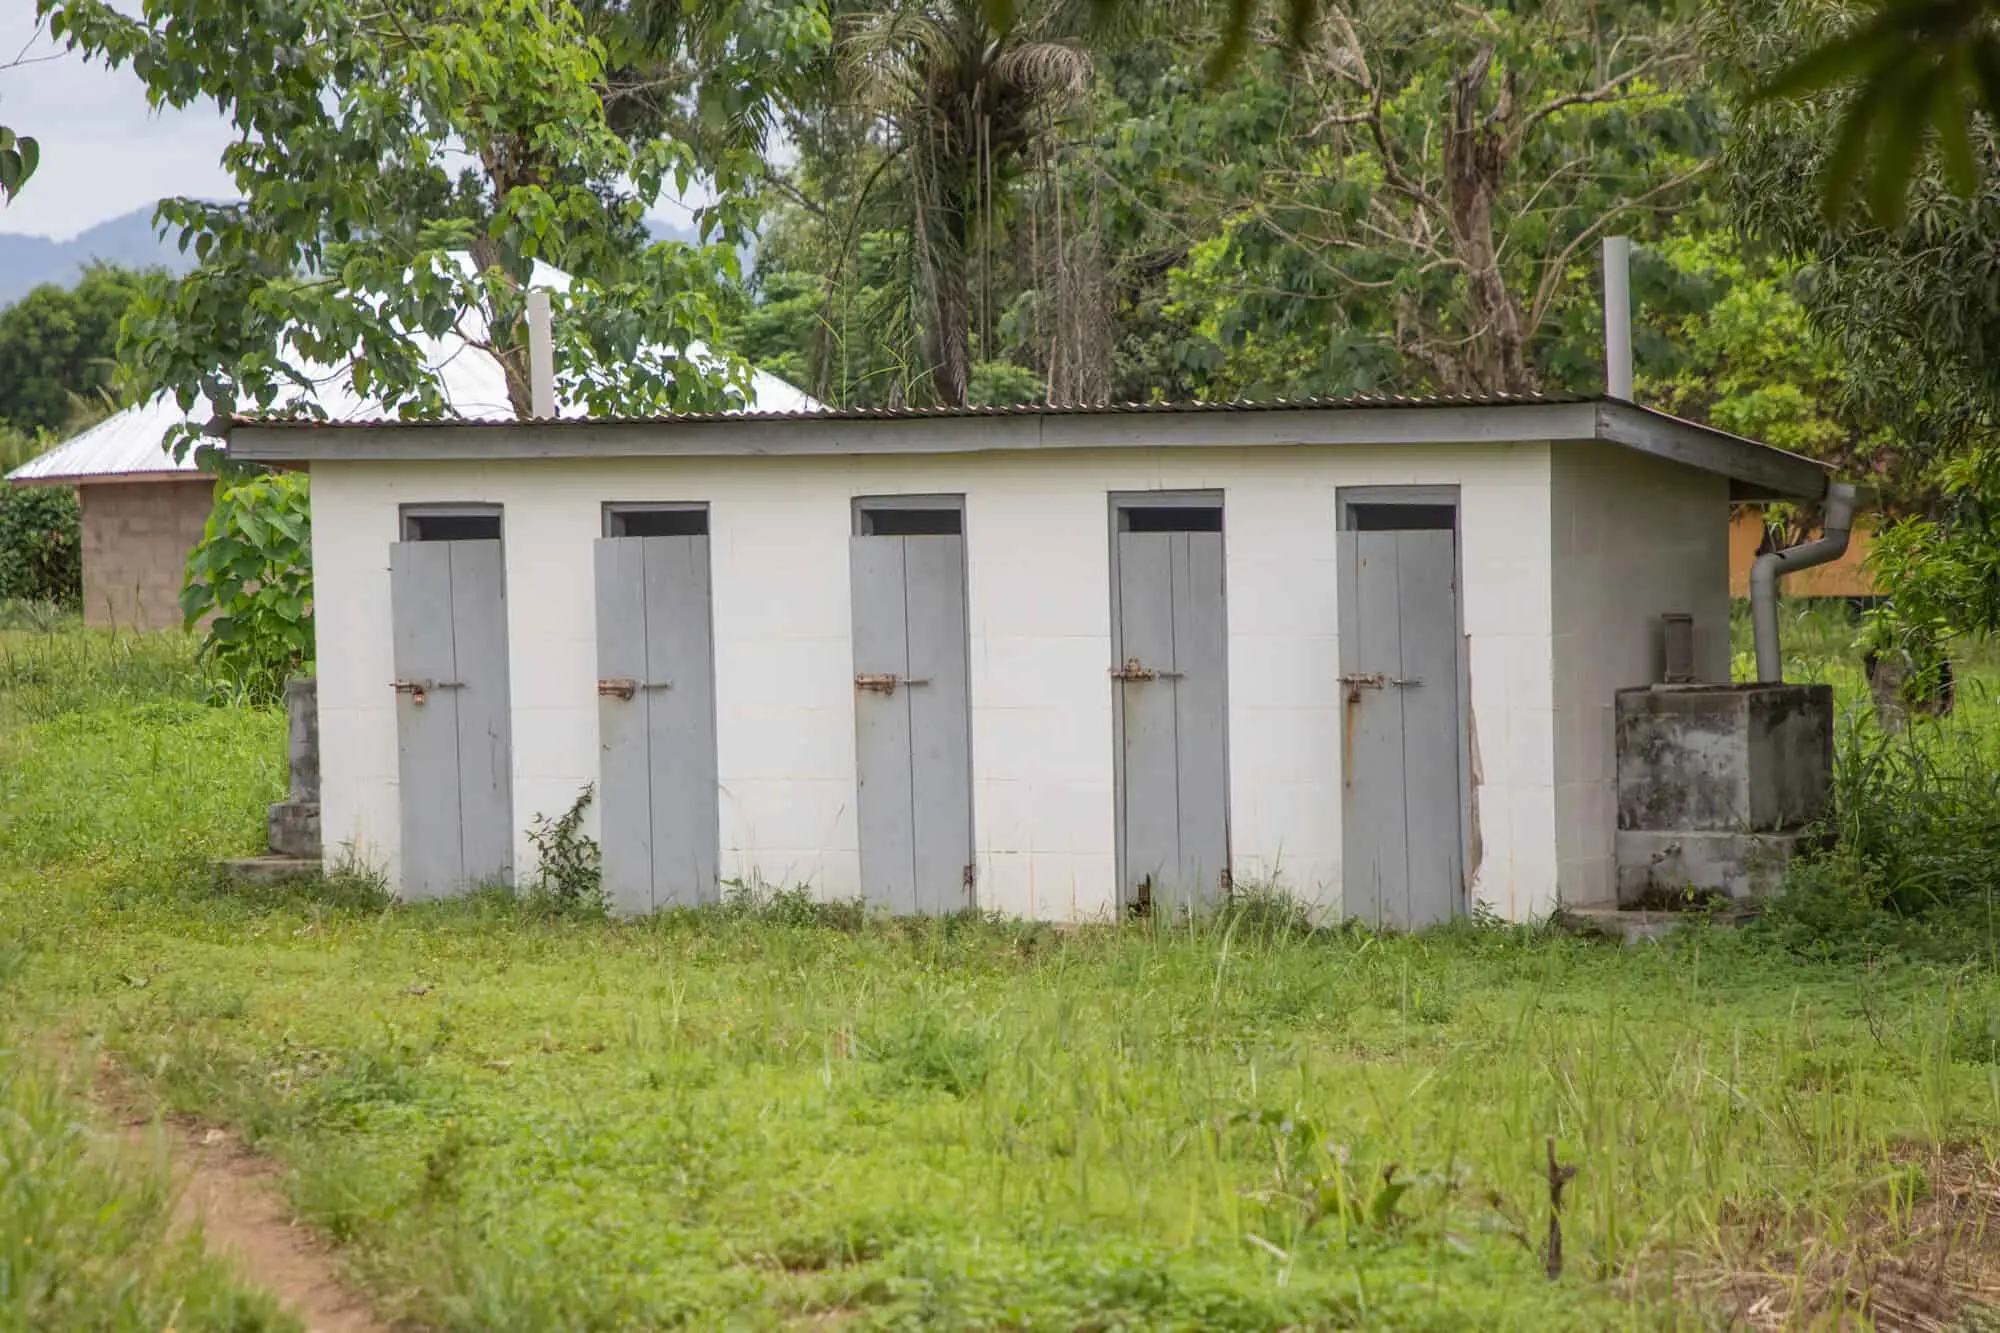 Girls' toilets of Benevolent Islamic PRI School in Yele Town, Sierra Leone, where Concern conducts Adolescent Sexual and Reproductive Health (ASRH) lessons